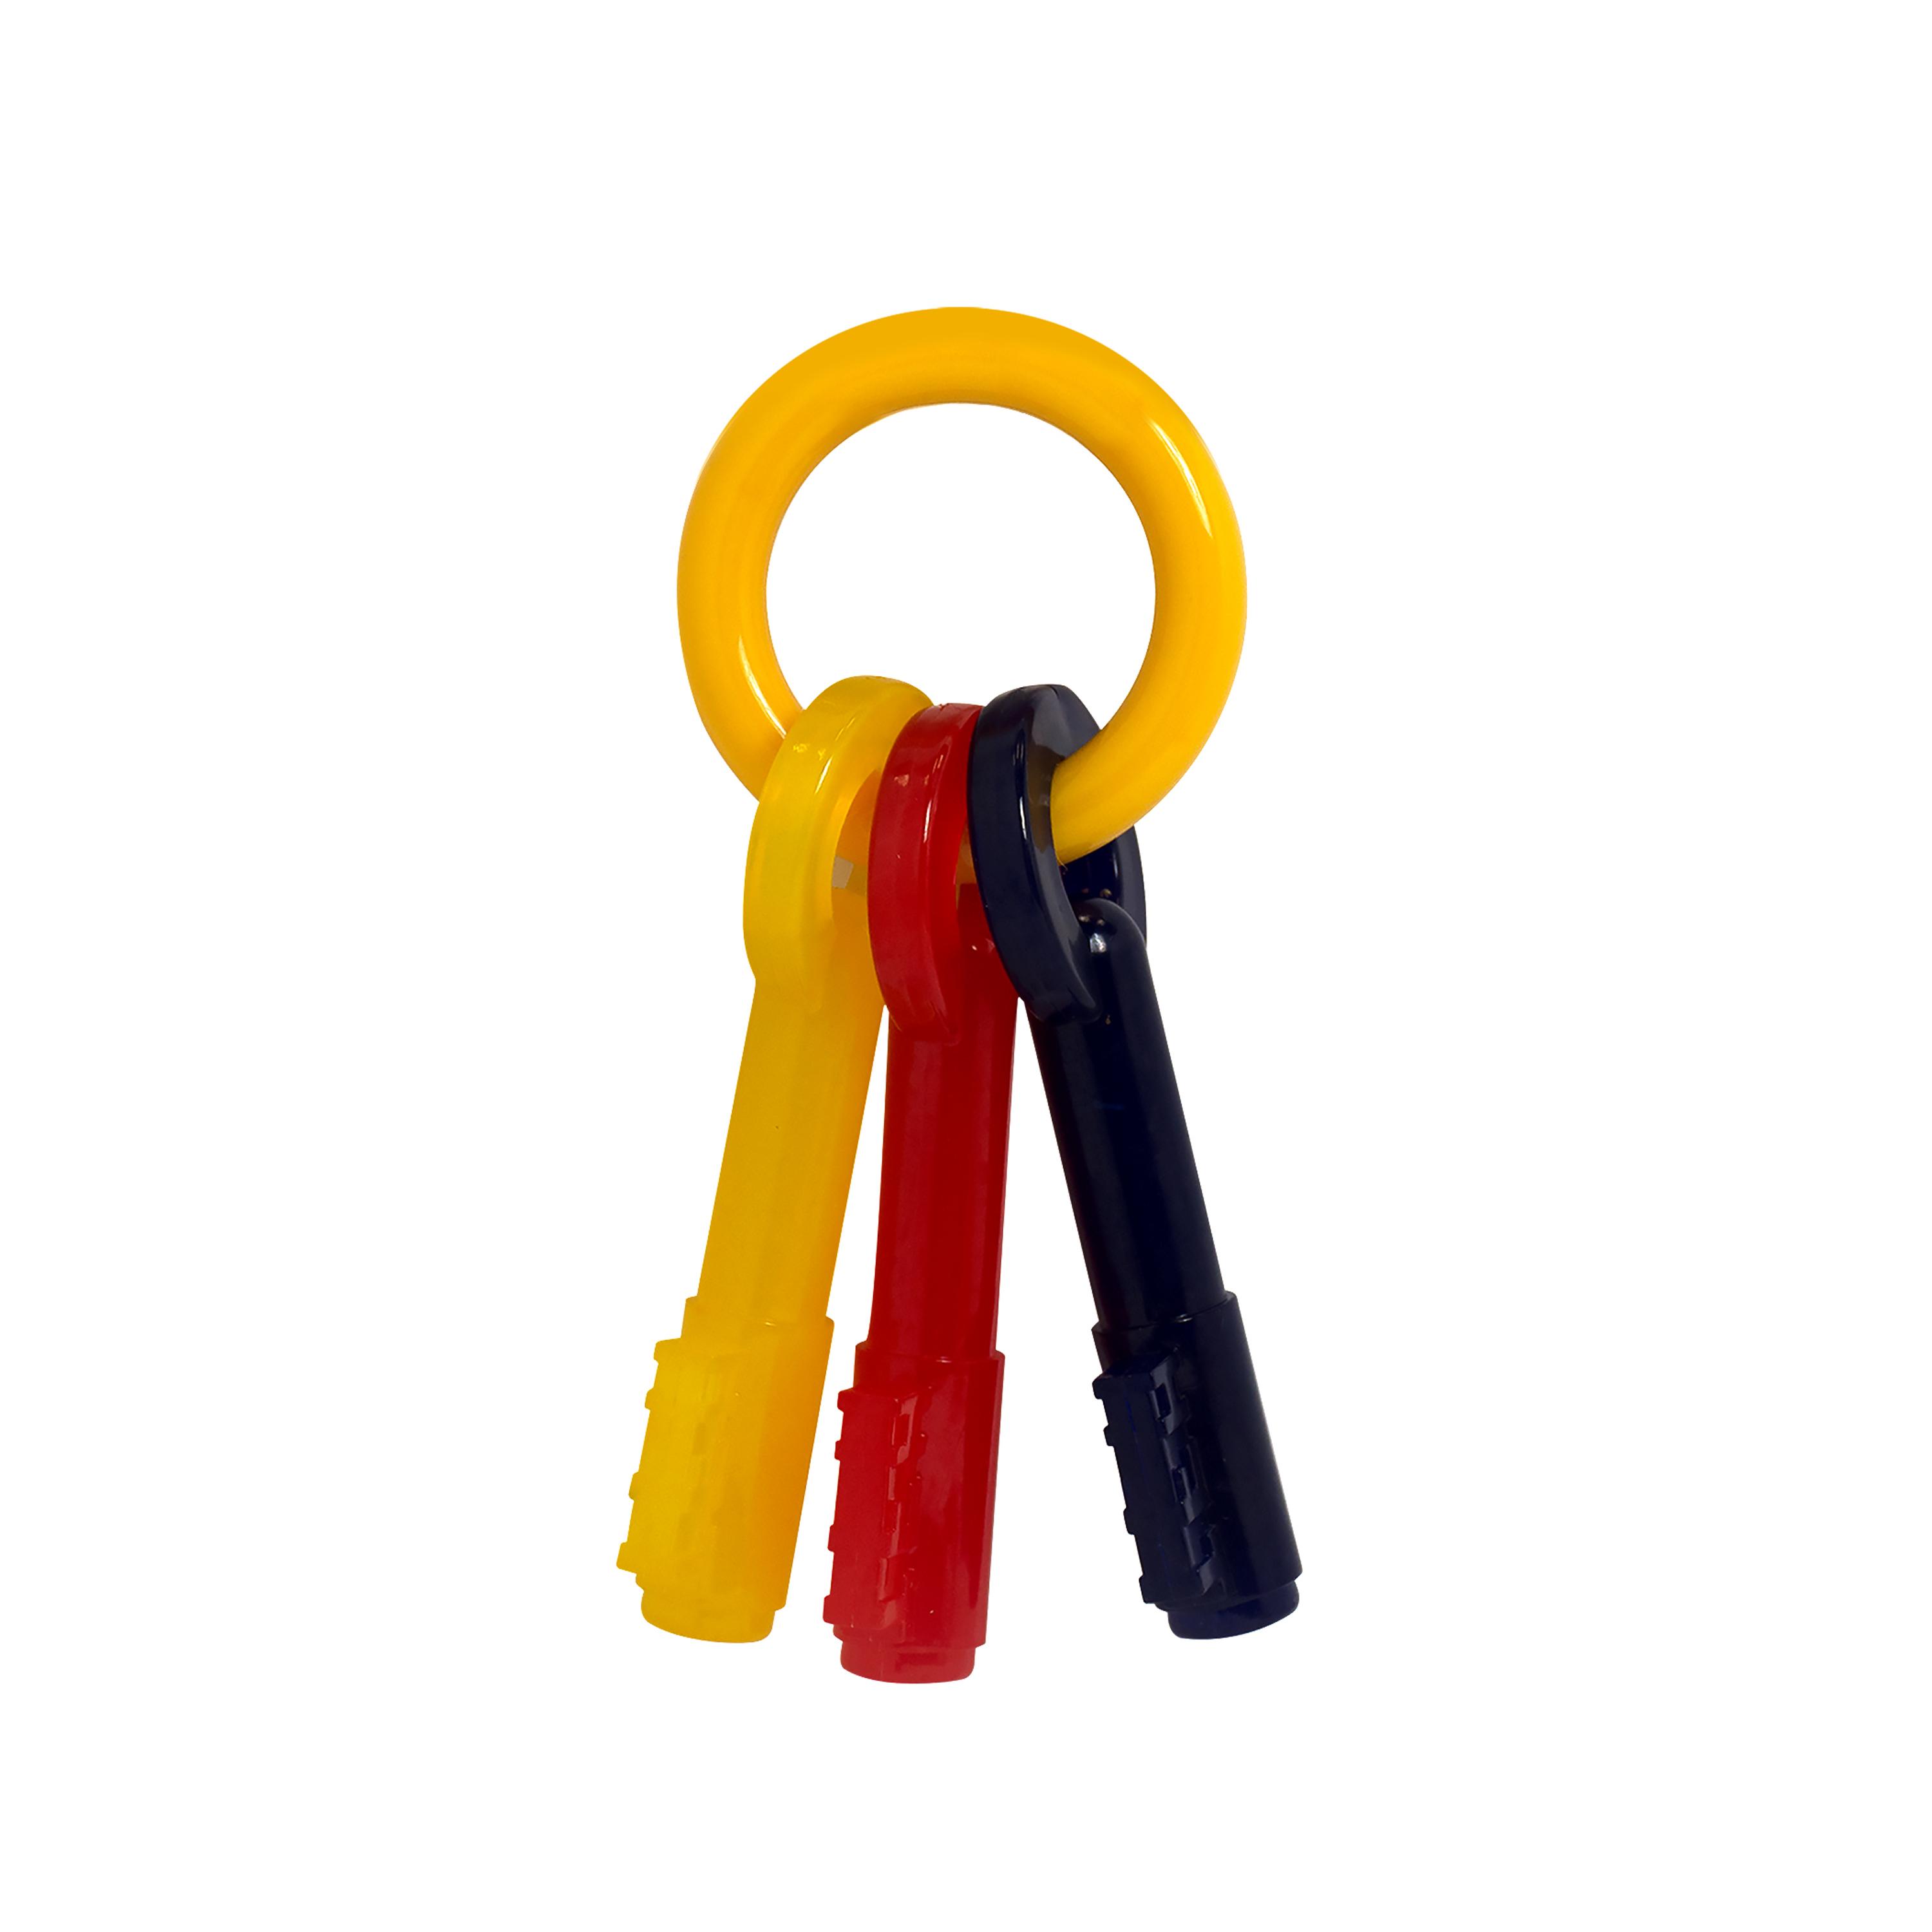 Nylabone Just for Puppies Teething Chew Toy Keys Bacon Medium/Wolf (1 Count) - image 5 of 7